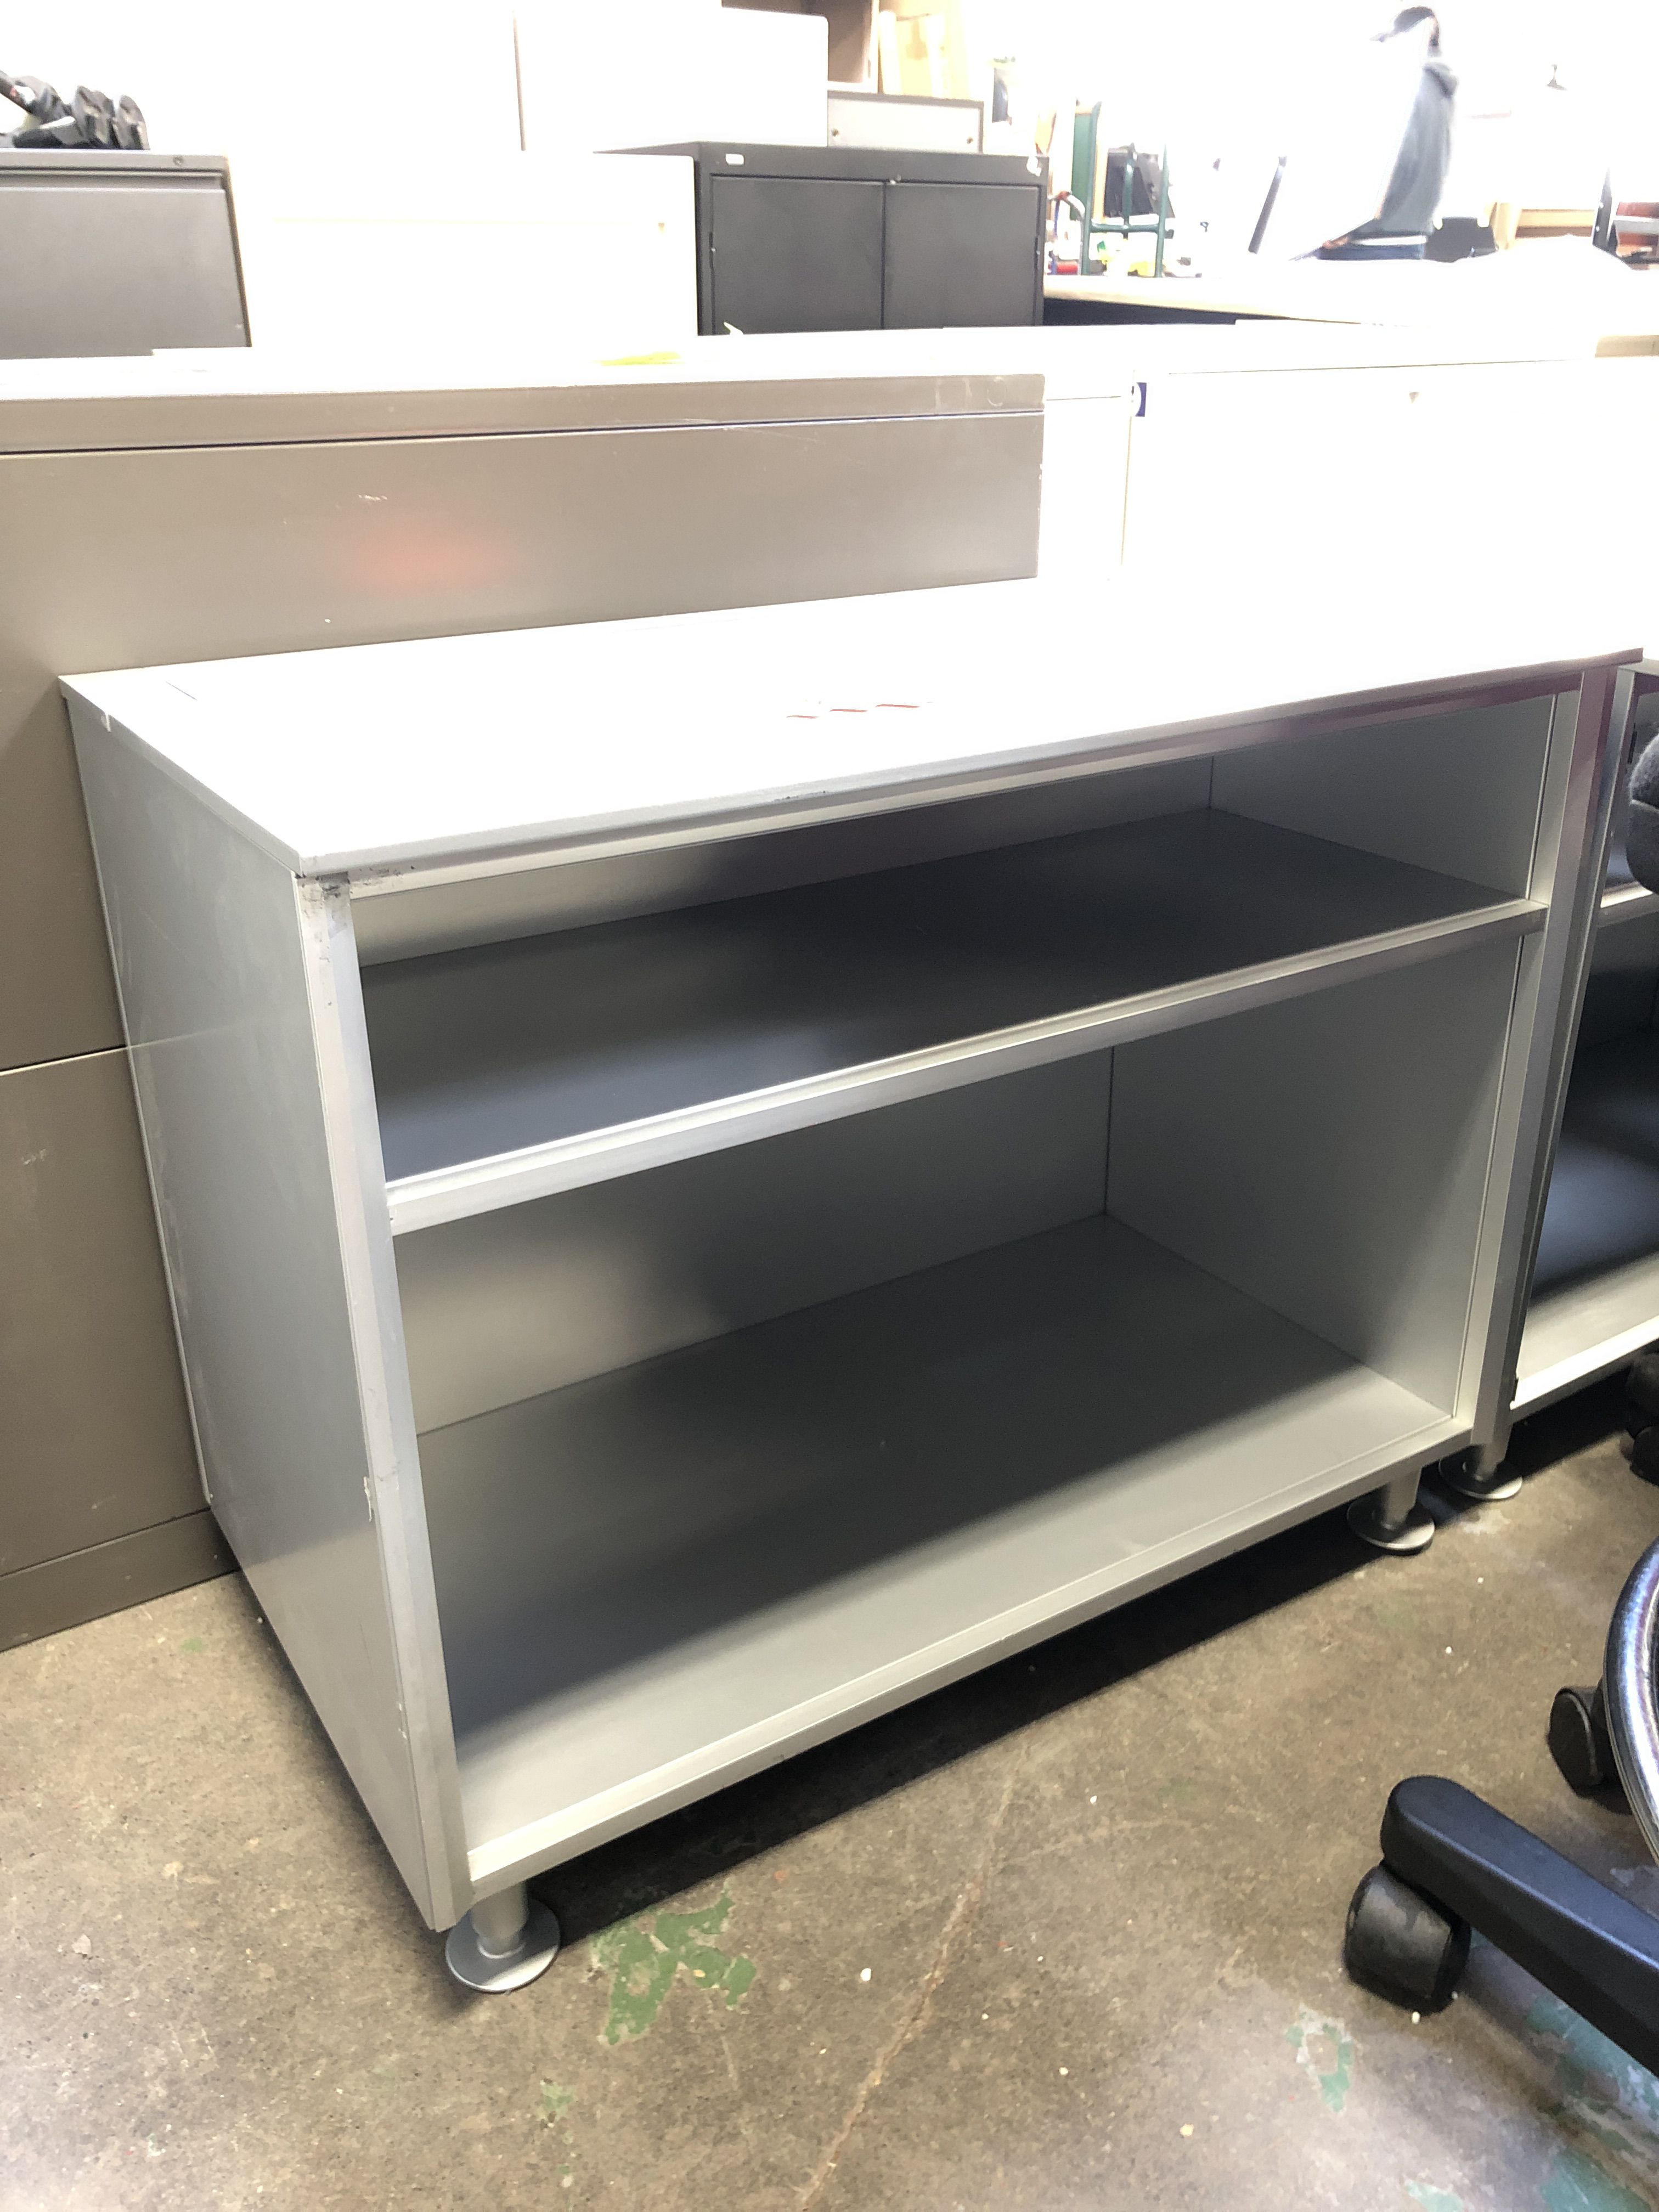 used LOW PROFILE metal Printer Stand/Shelving unit, electrical cord organizer $39 ea.